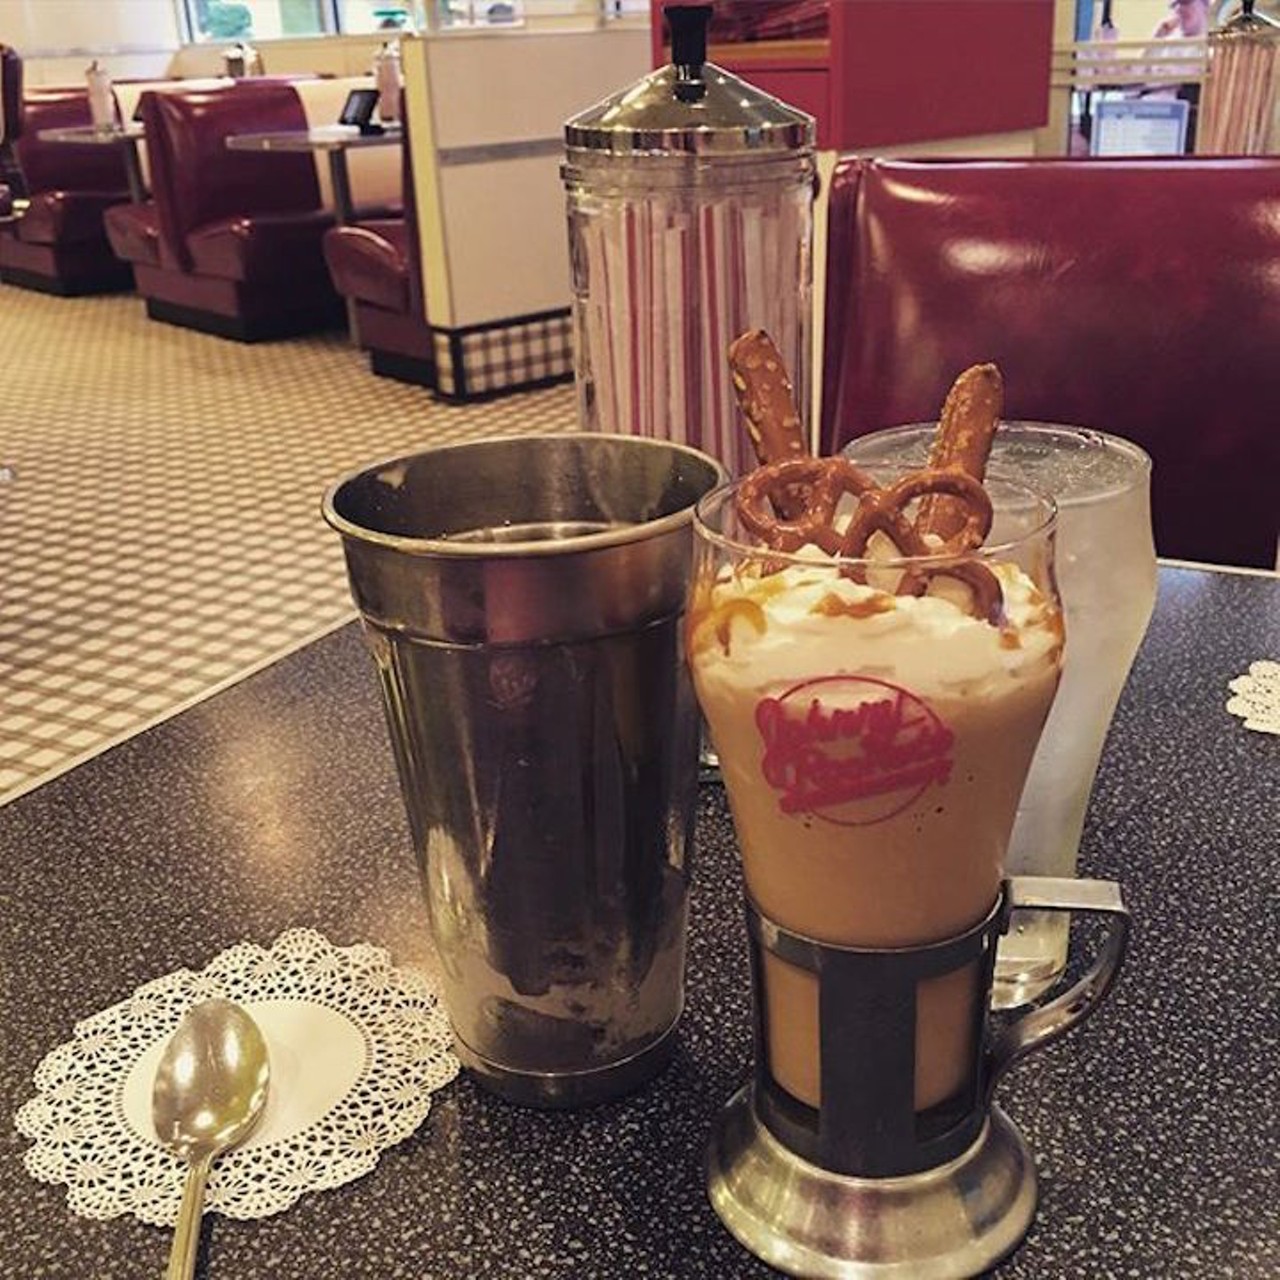 Johnny Rockets
9101 International Drive #1100; 407-903-0762
Chains are rather risky business when it comes to shakes, but when someone actually drops a mini apple pie or a handful of pretzels into their concoction, the world is reminded that exceptions do exist.
Photo via nandodemarchi/Instagram